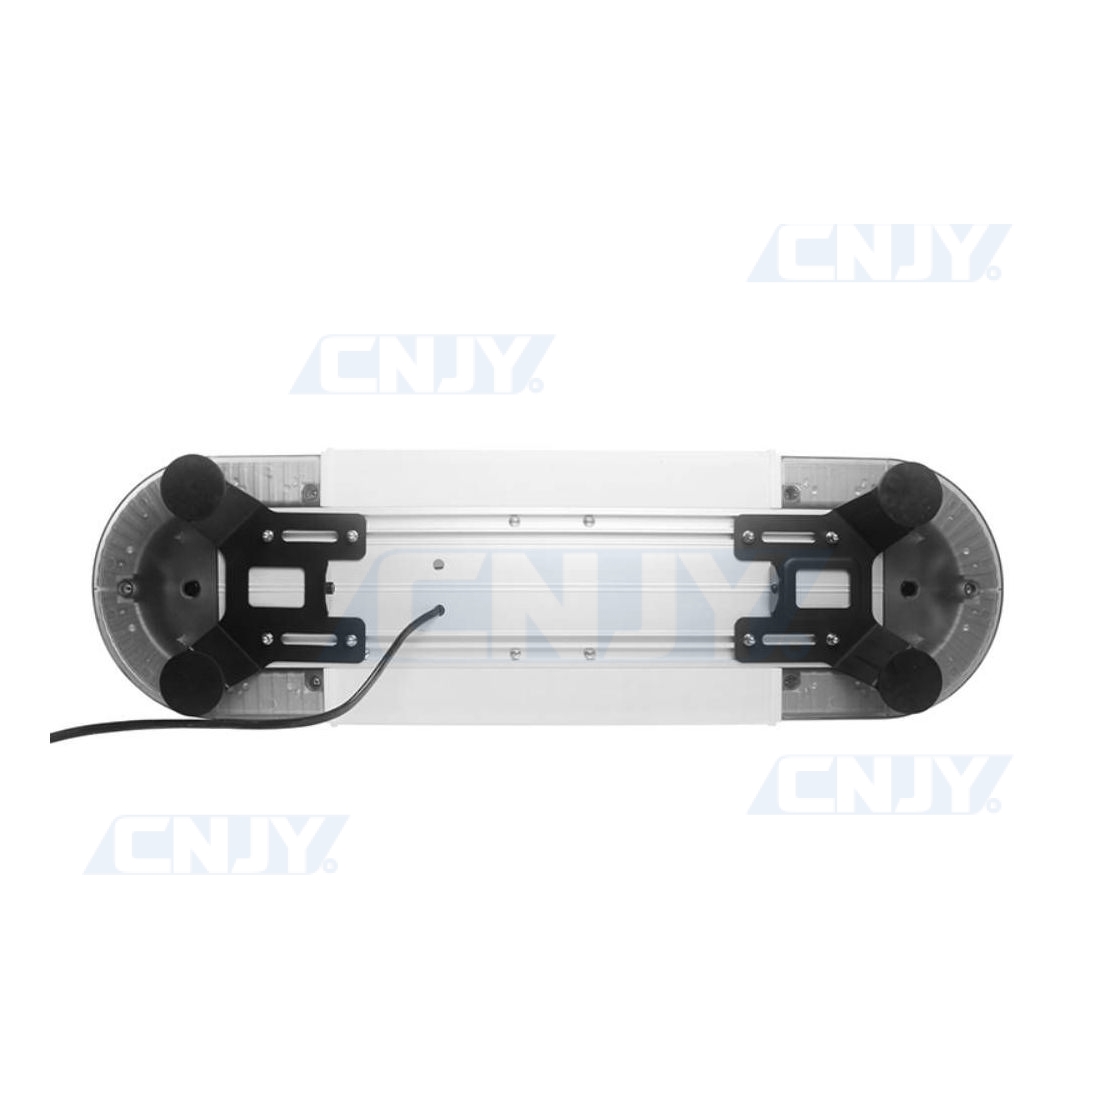 Gyrophare, LED, Multicolore, Fixe, 24 VAC/DC, 85 mm x 130 mm, IP66